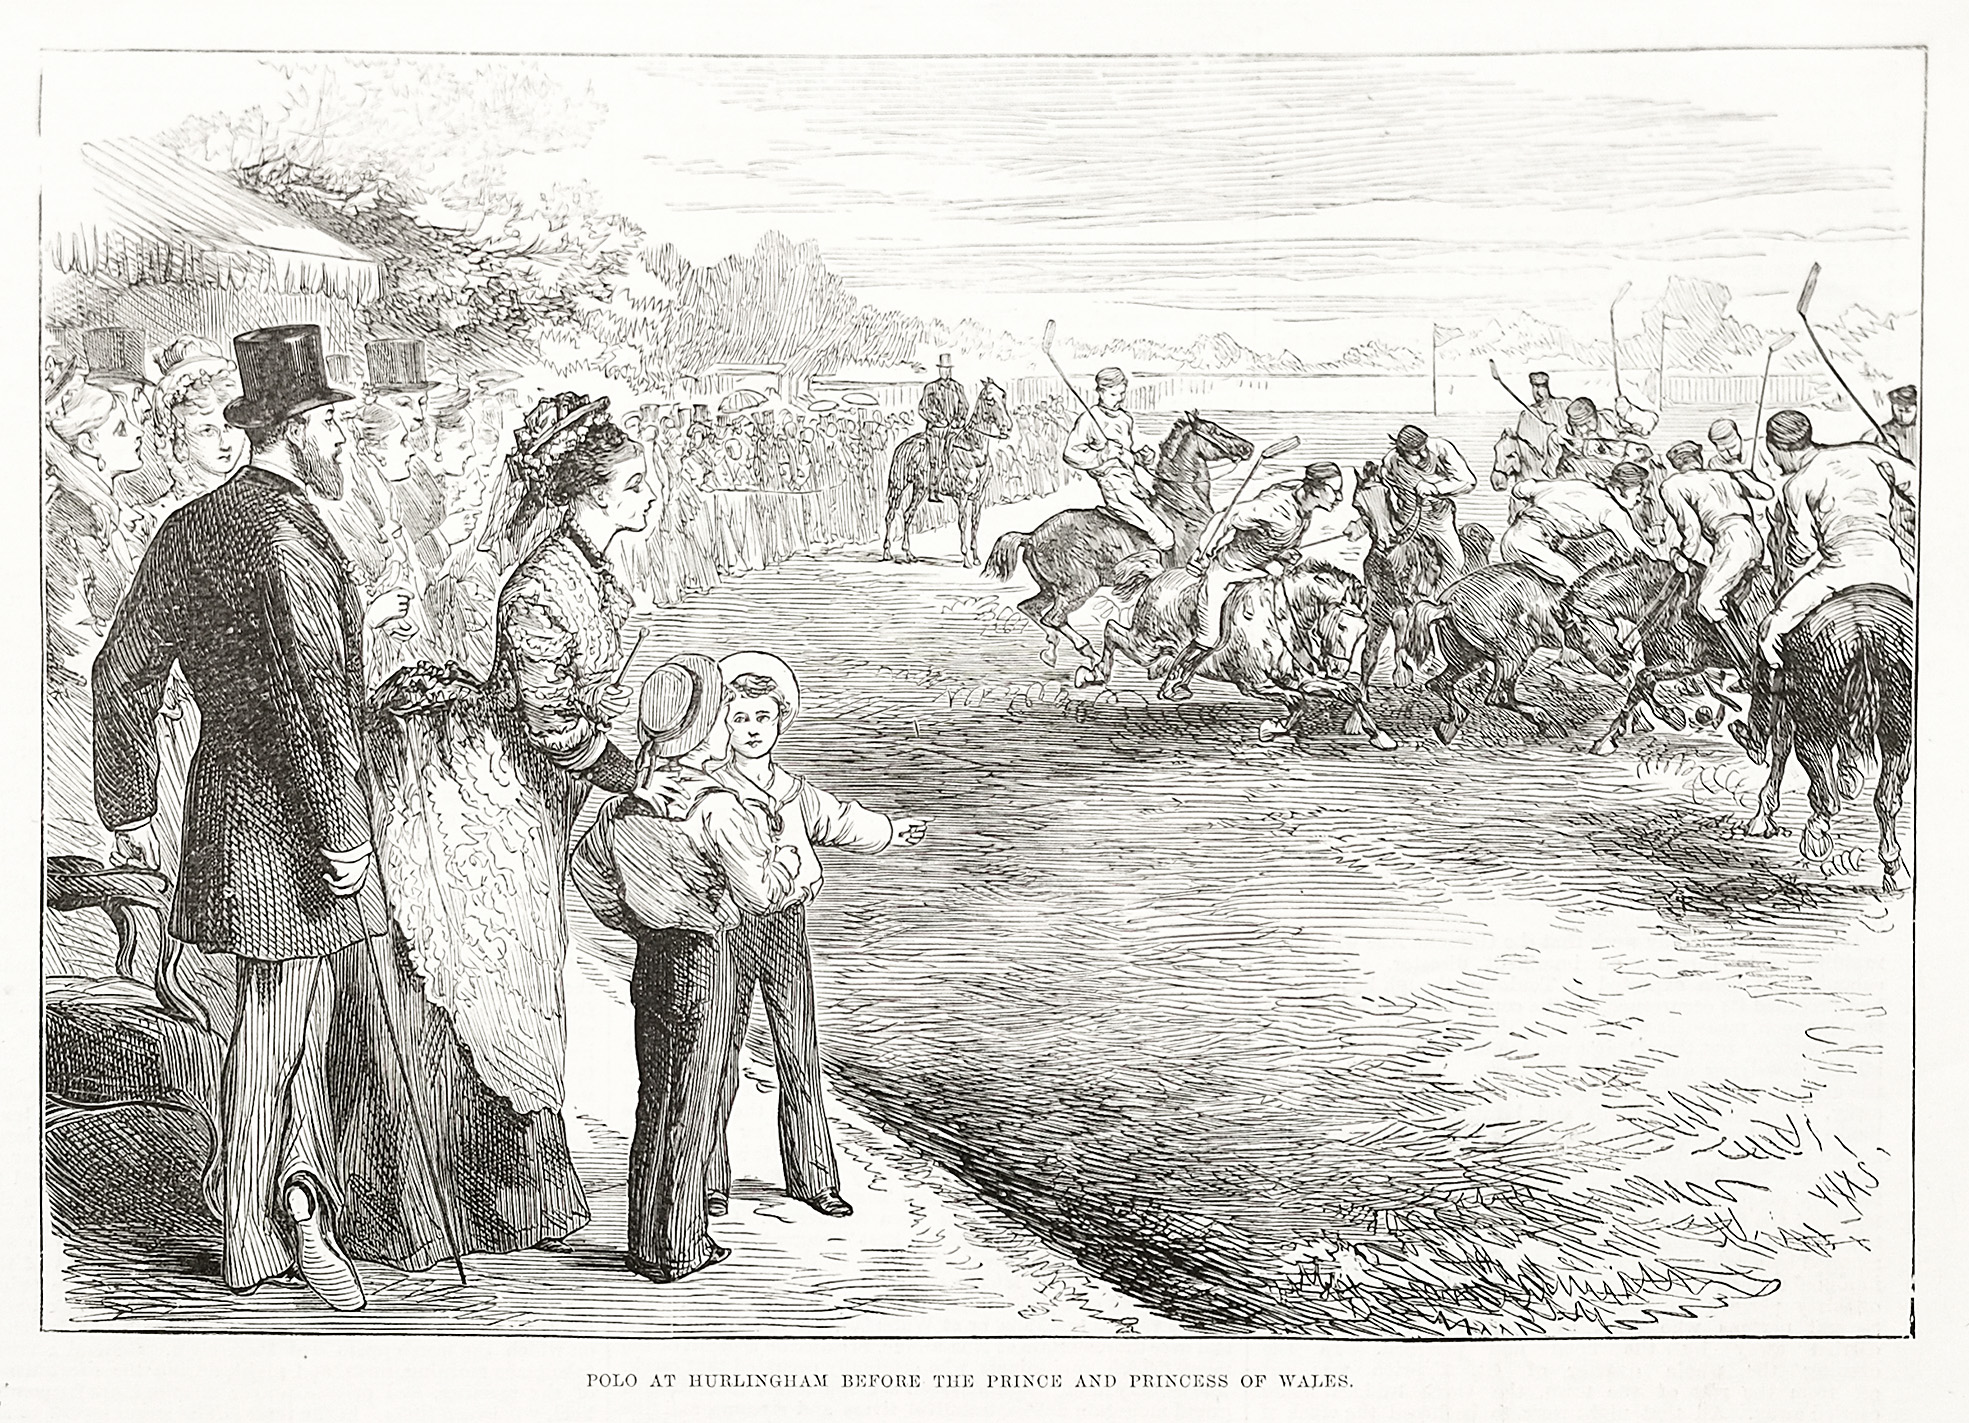 Polo at Hurlingham before the prince and princess of Wales. - Antique Print from 1875